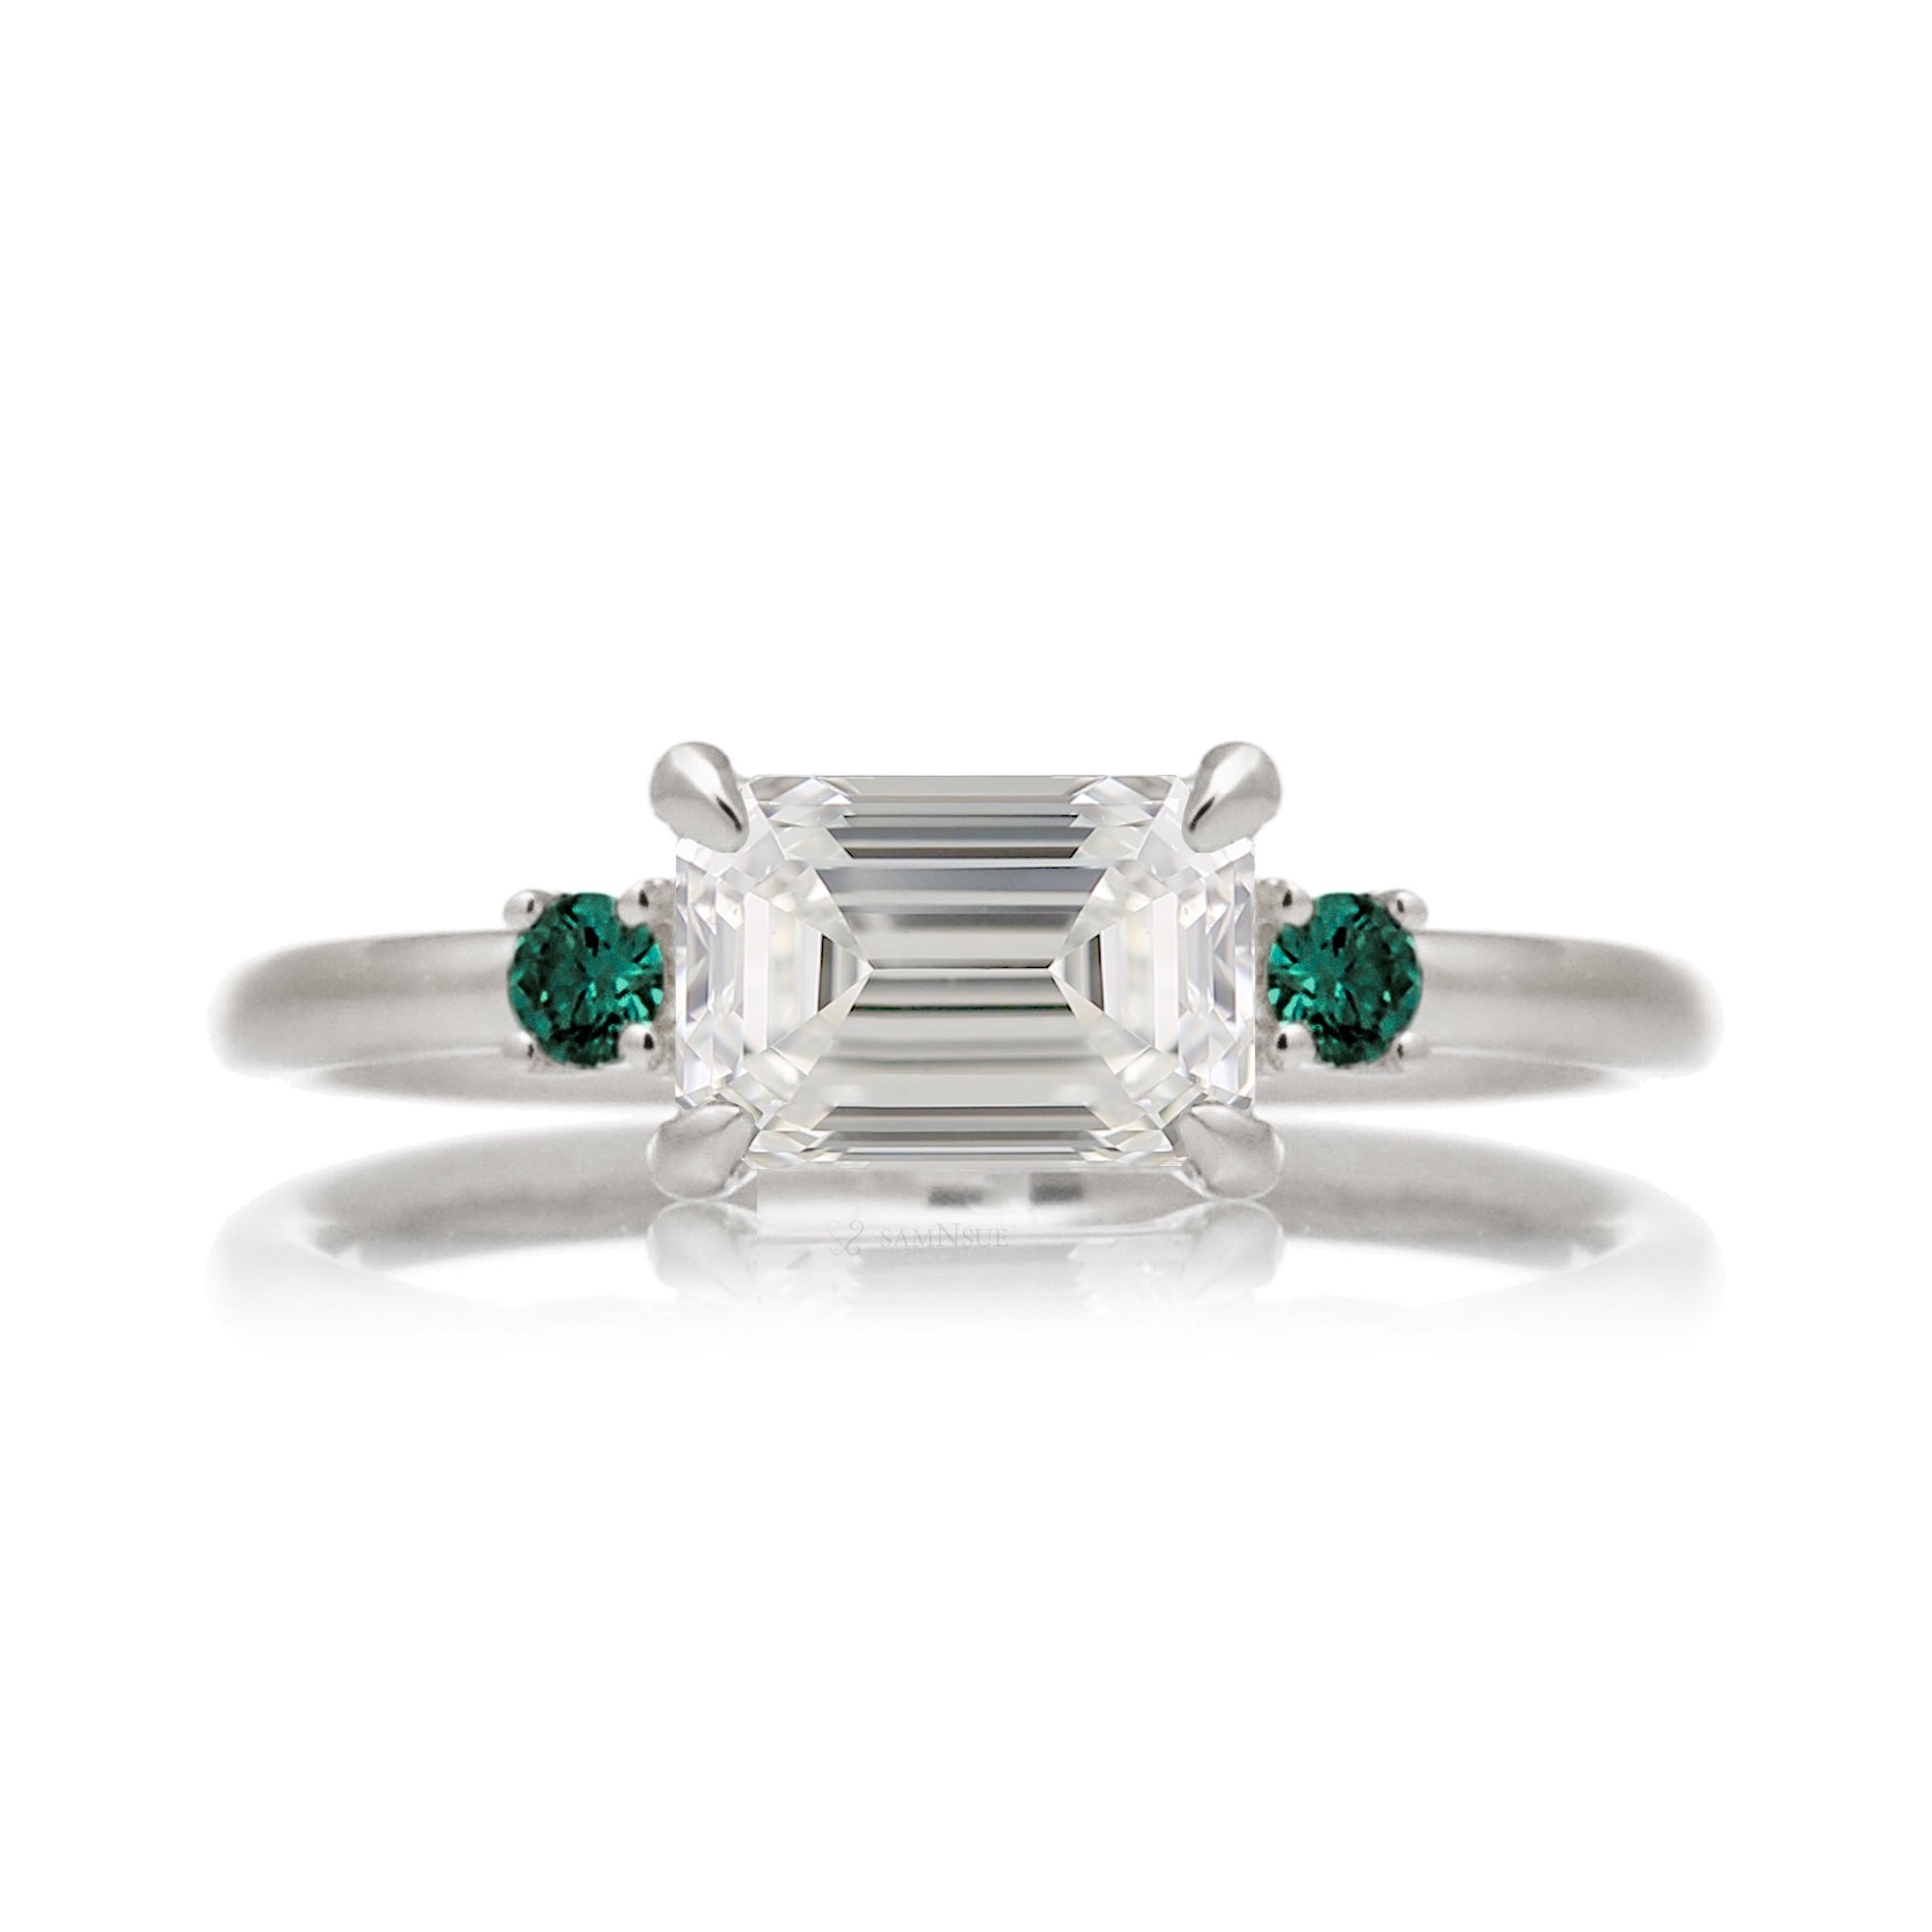 east-west emerald cut diamond three stone ring the Lena with side green emeralds white gold